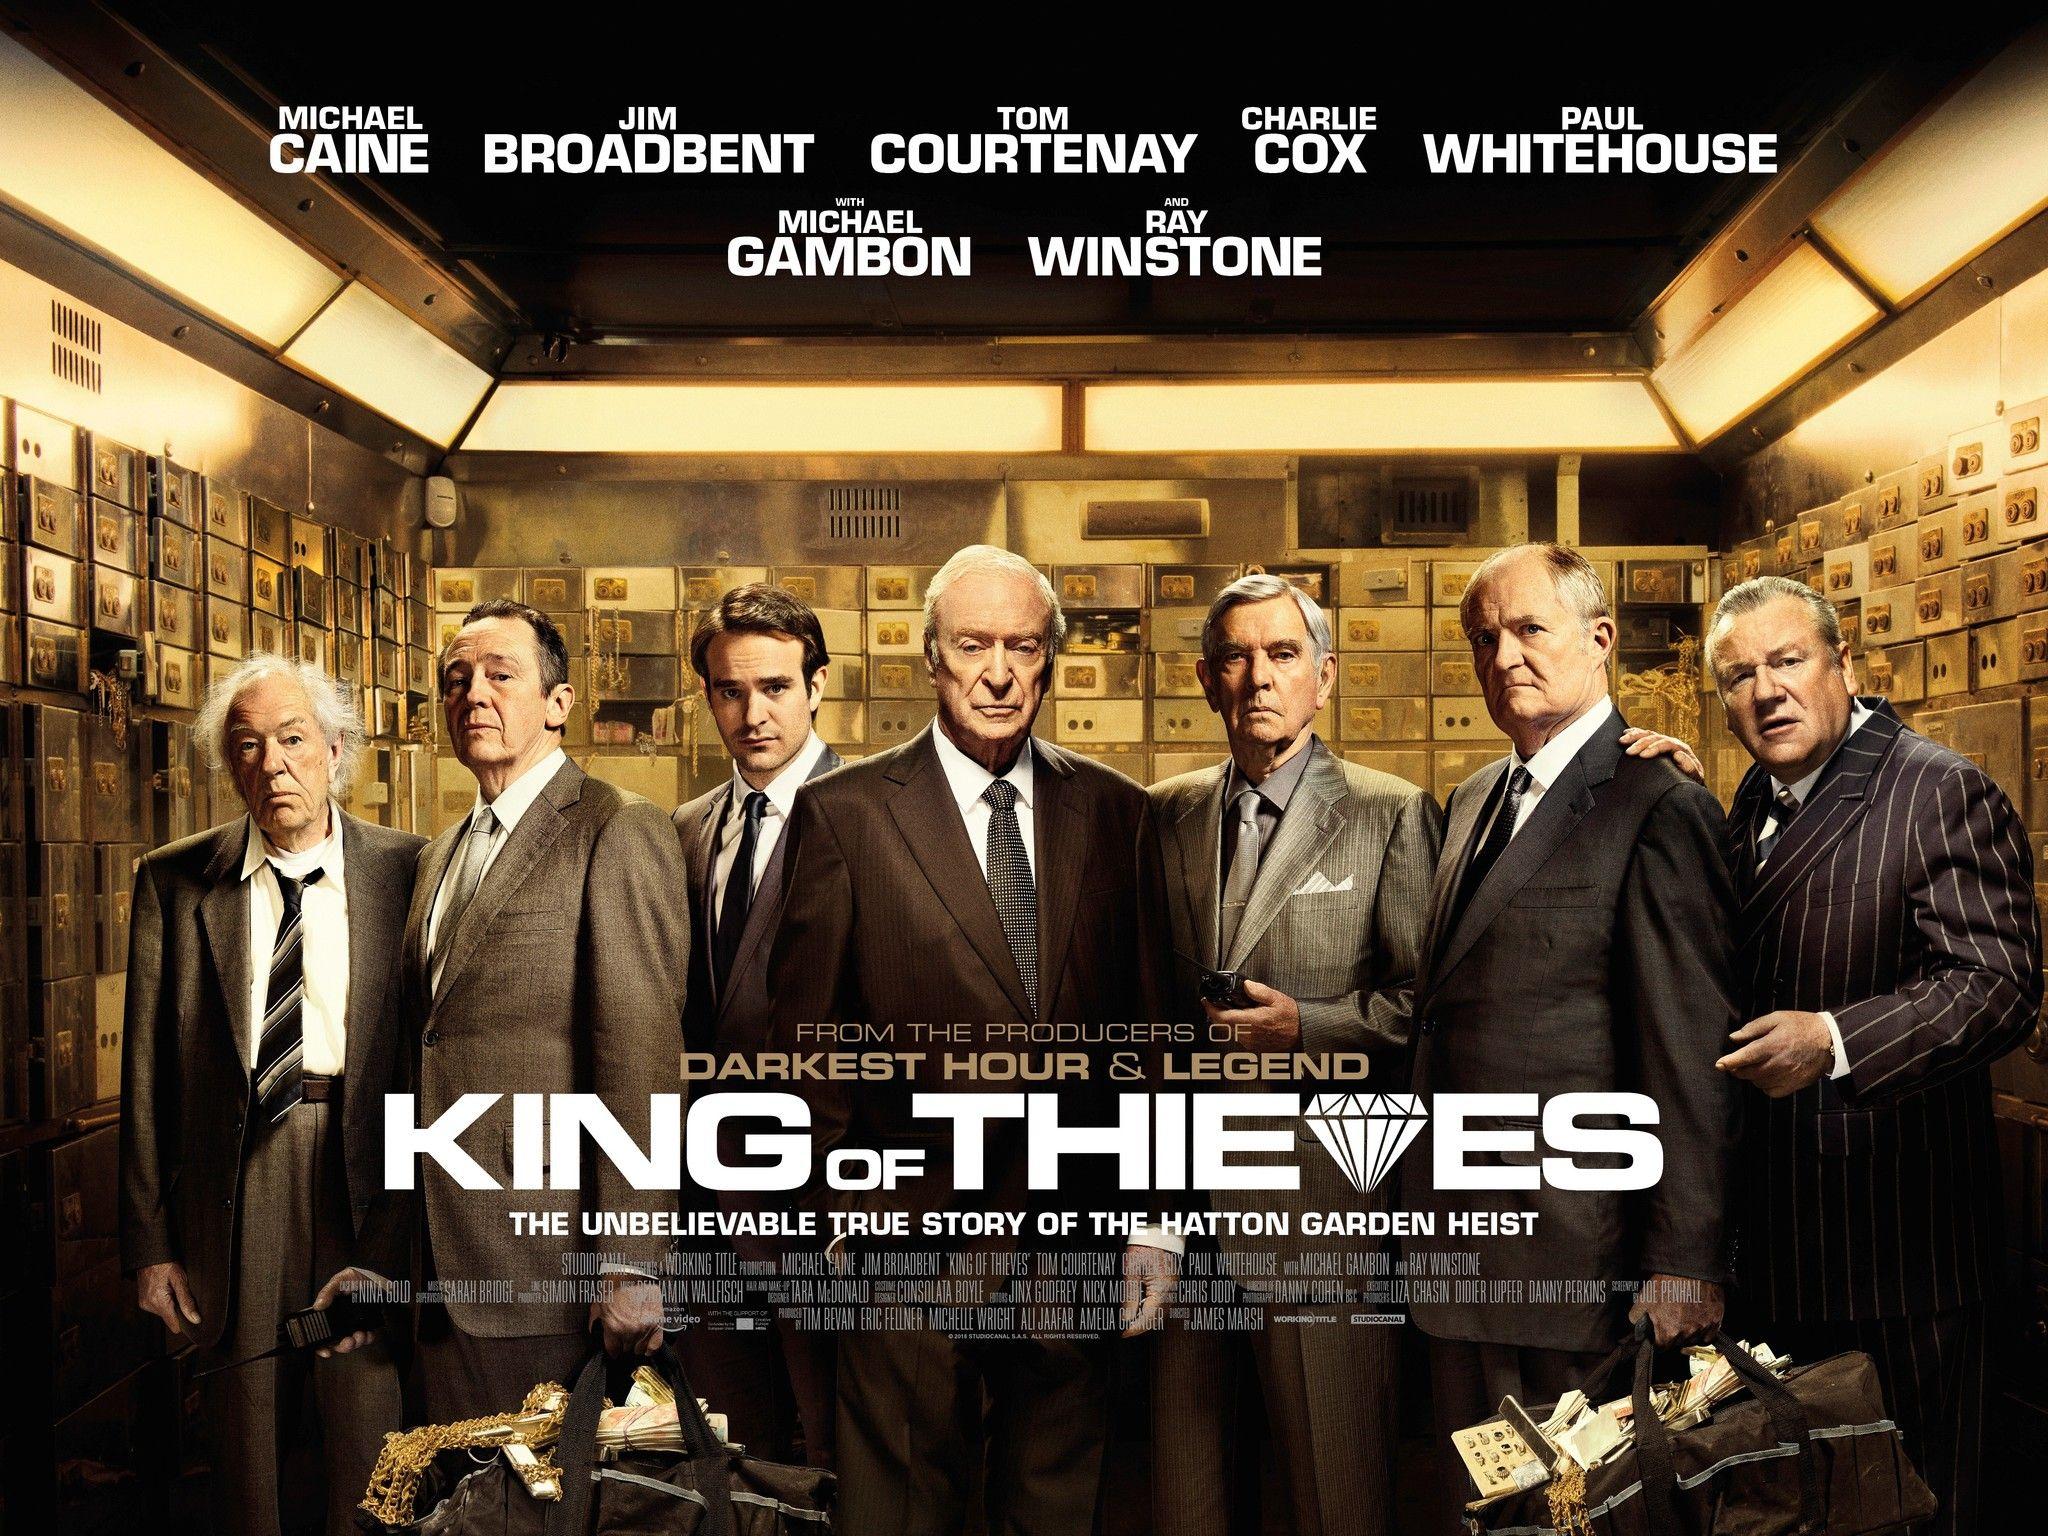 King of Thieves (2018)